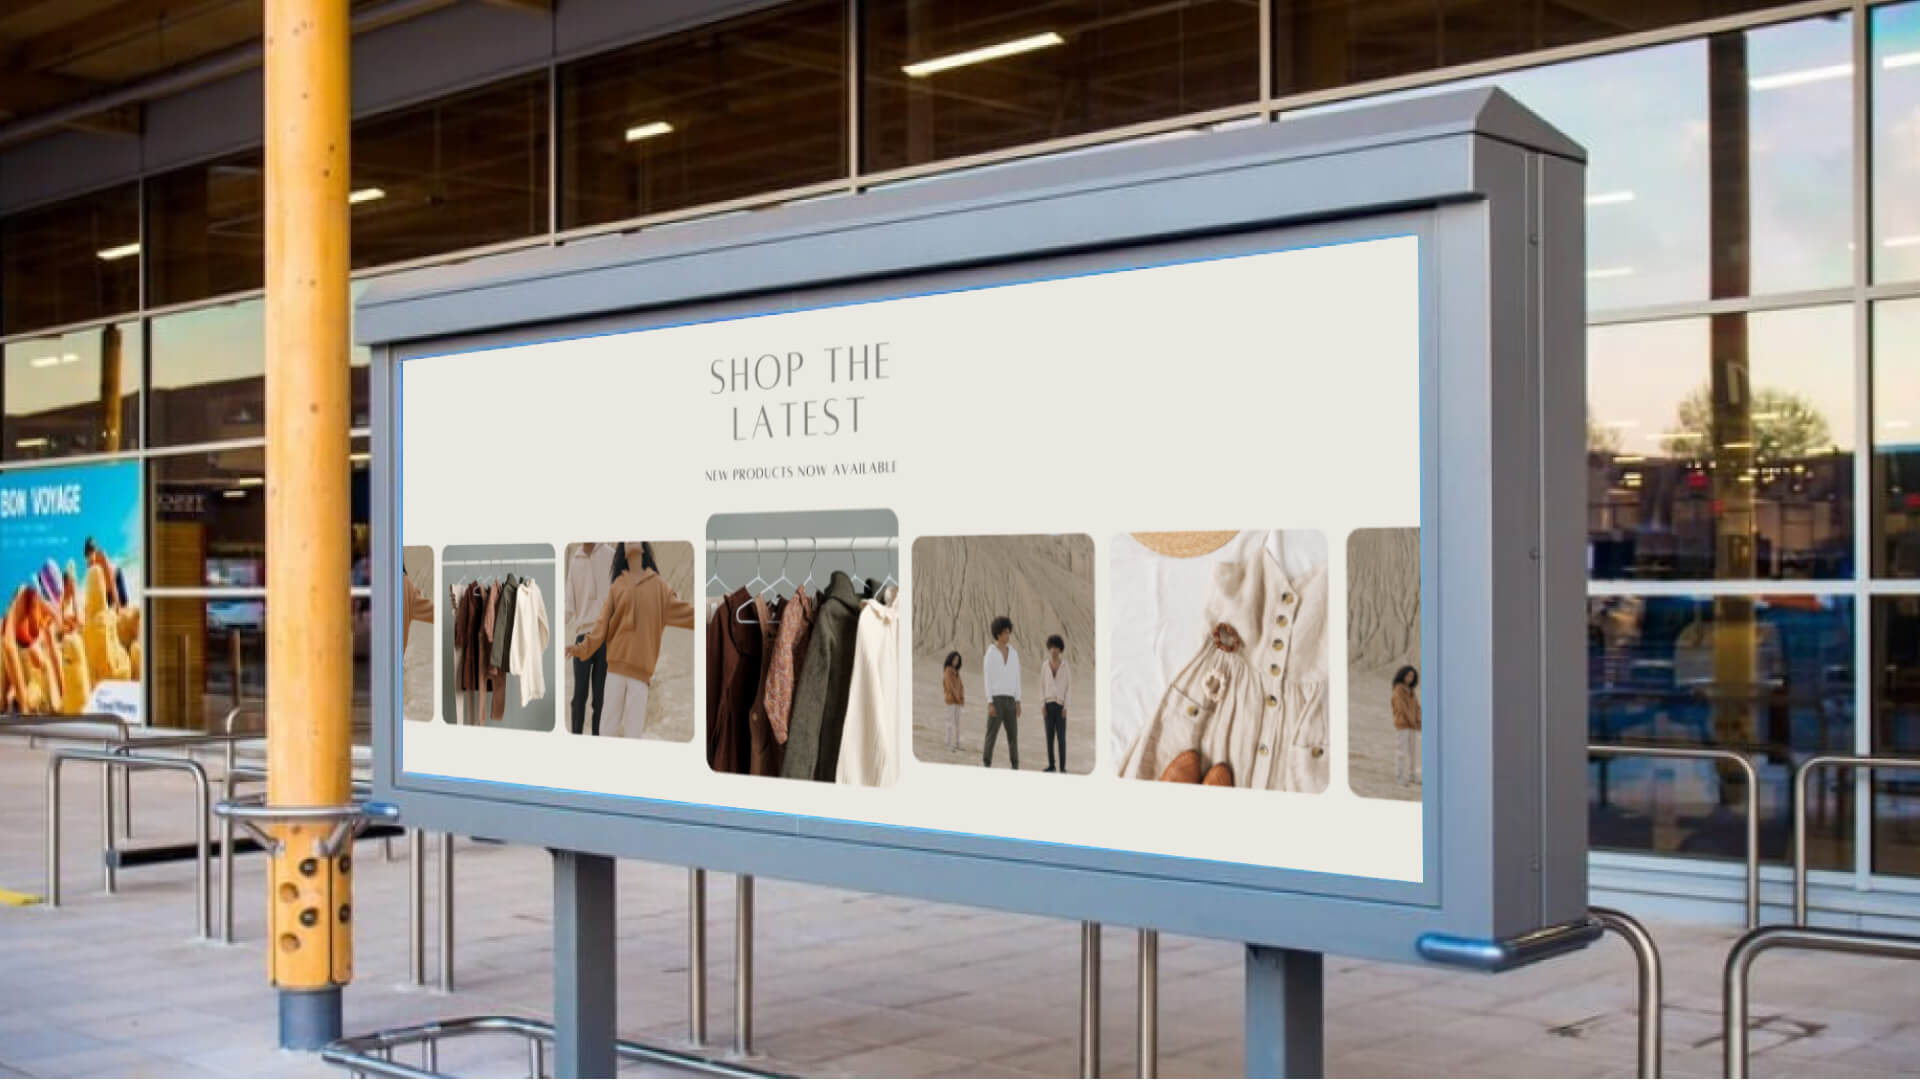 Outdoor digital moving signage used in retail settings.